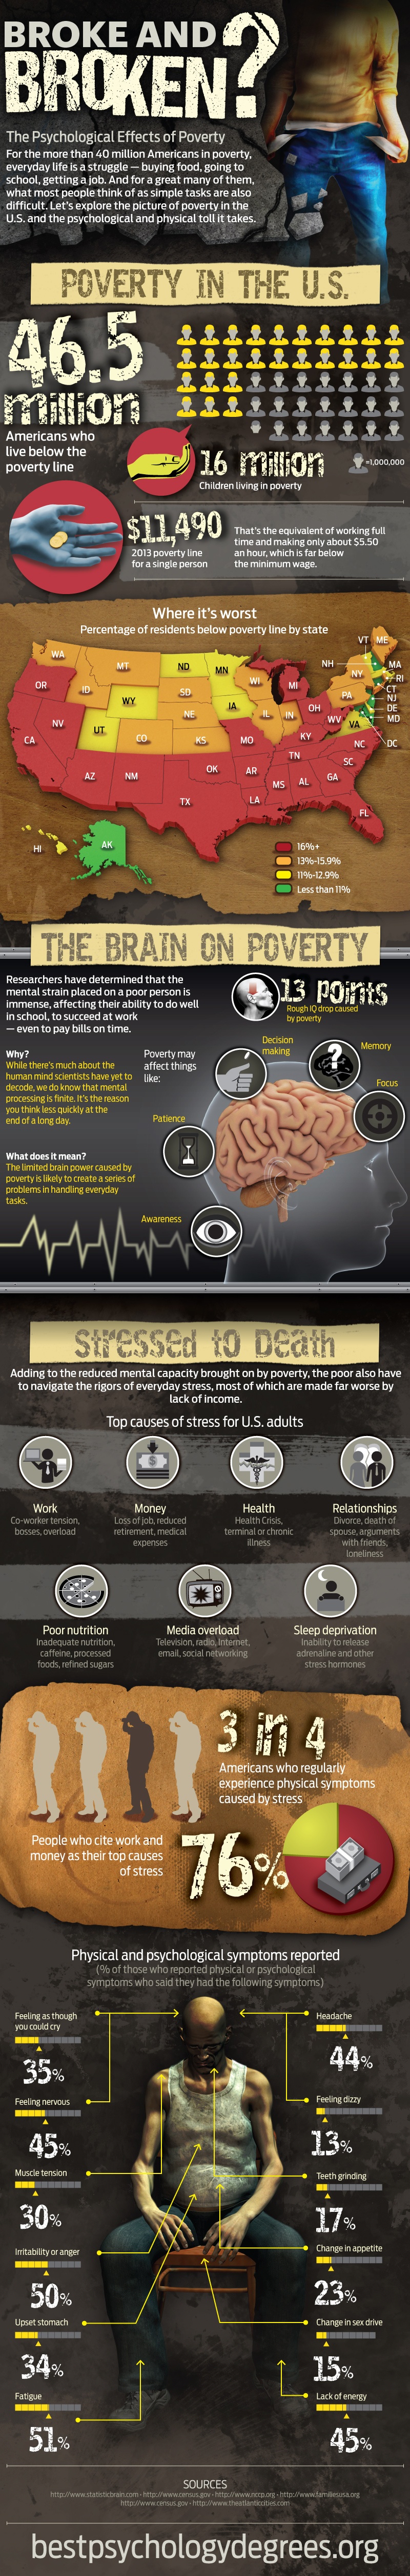 The Psychological Effects of Poverty Infographic